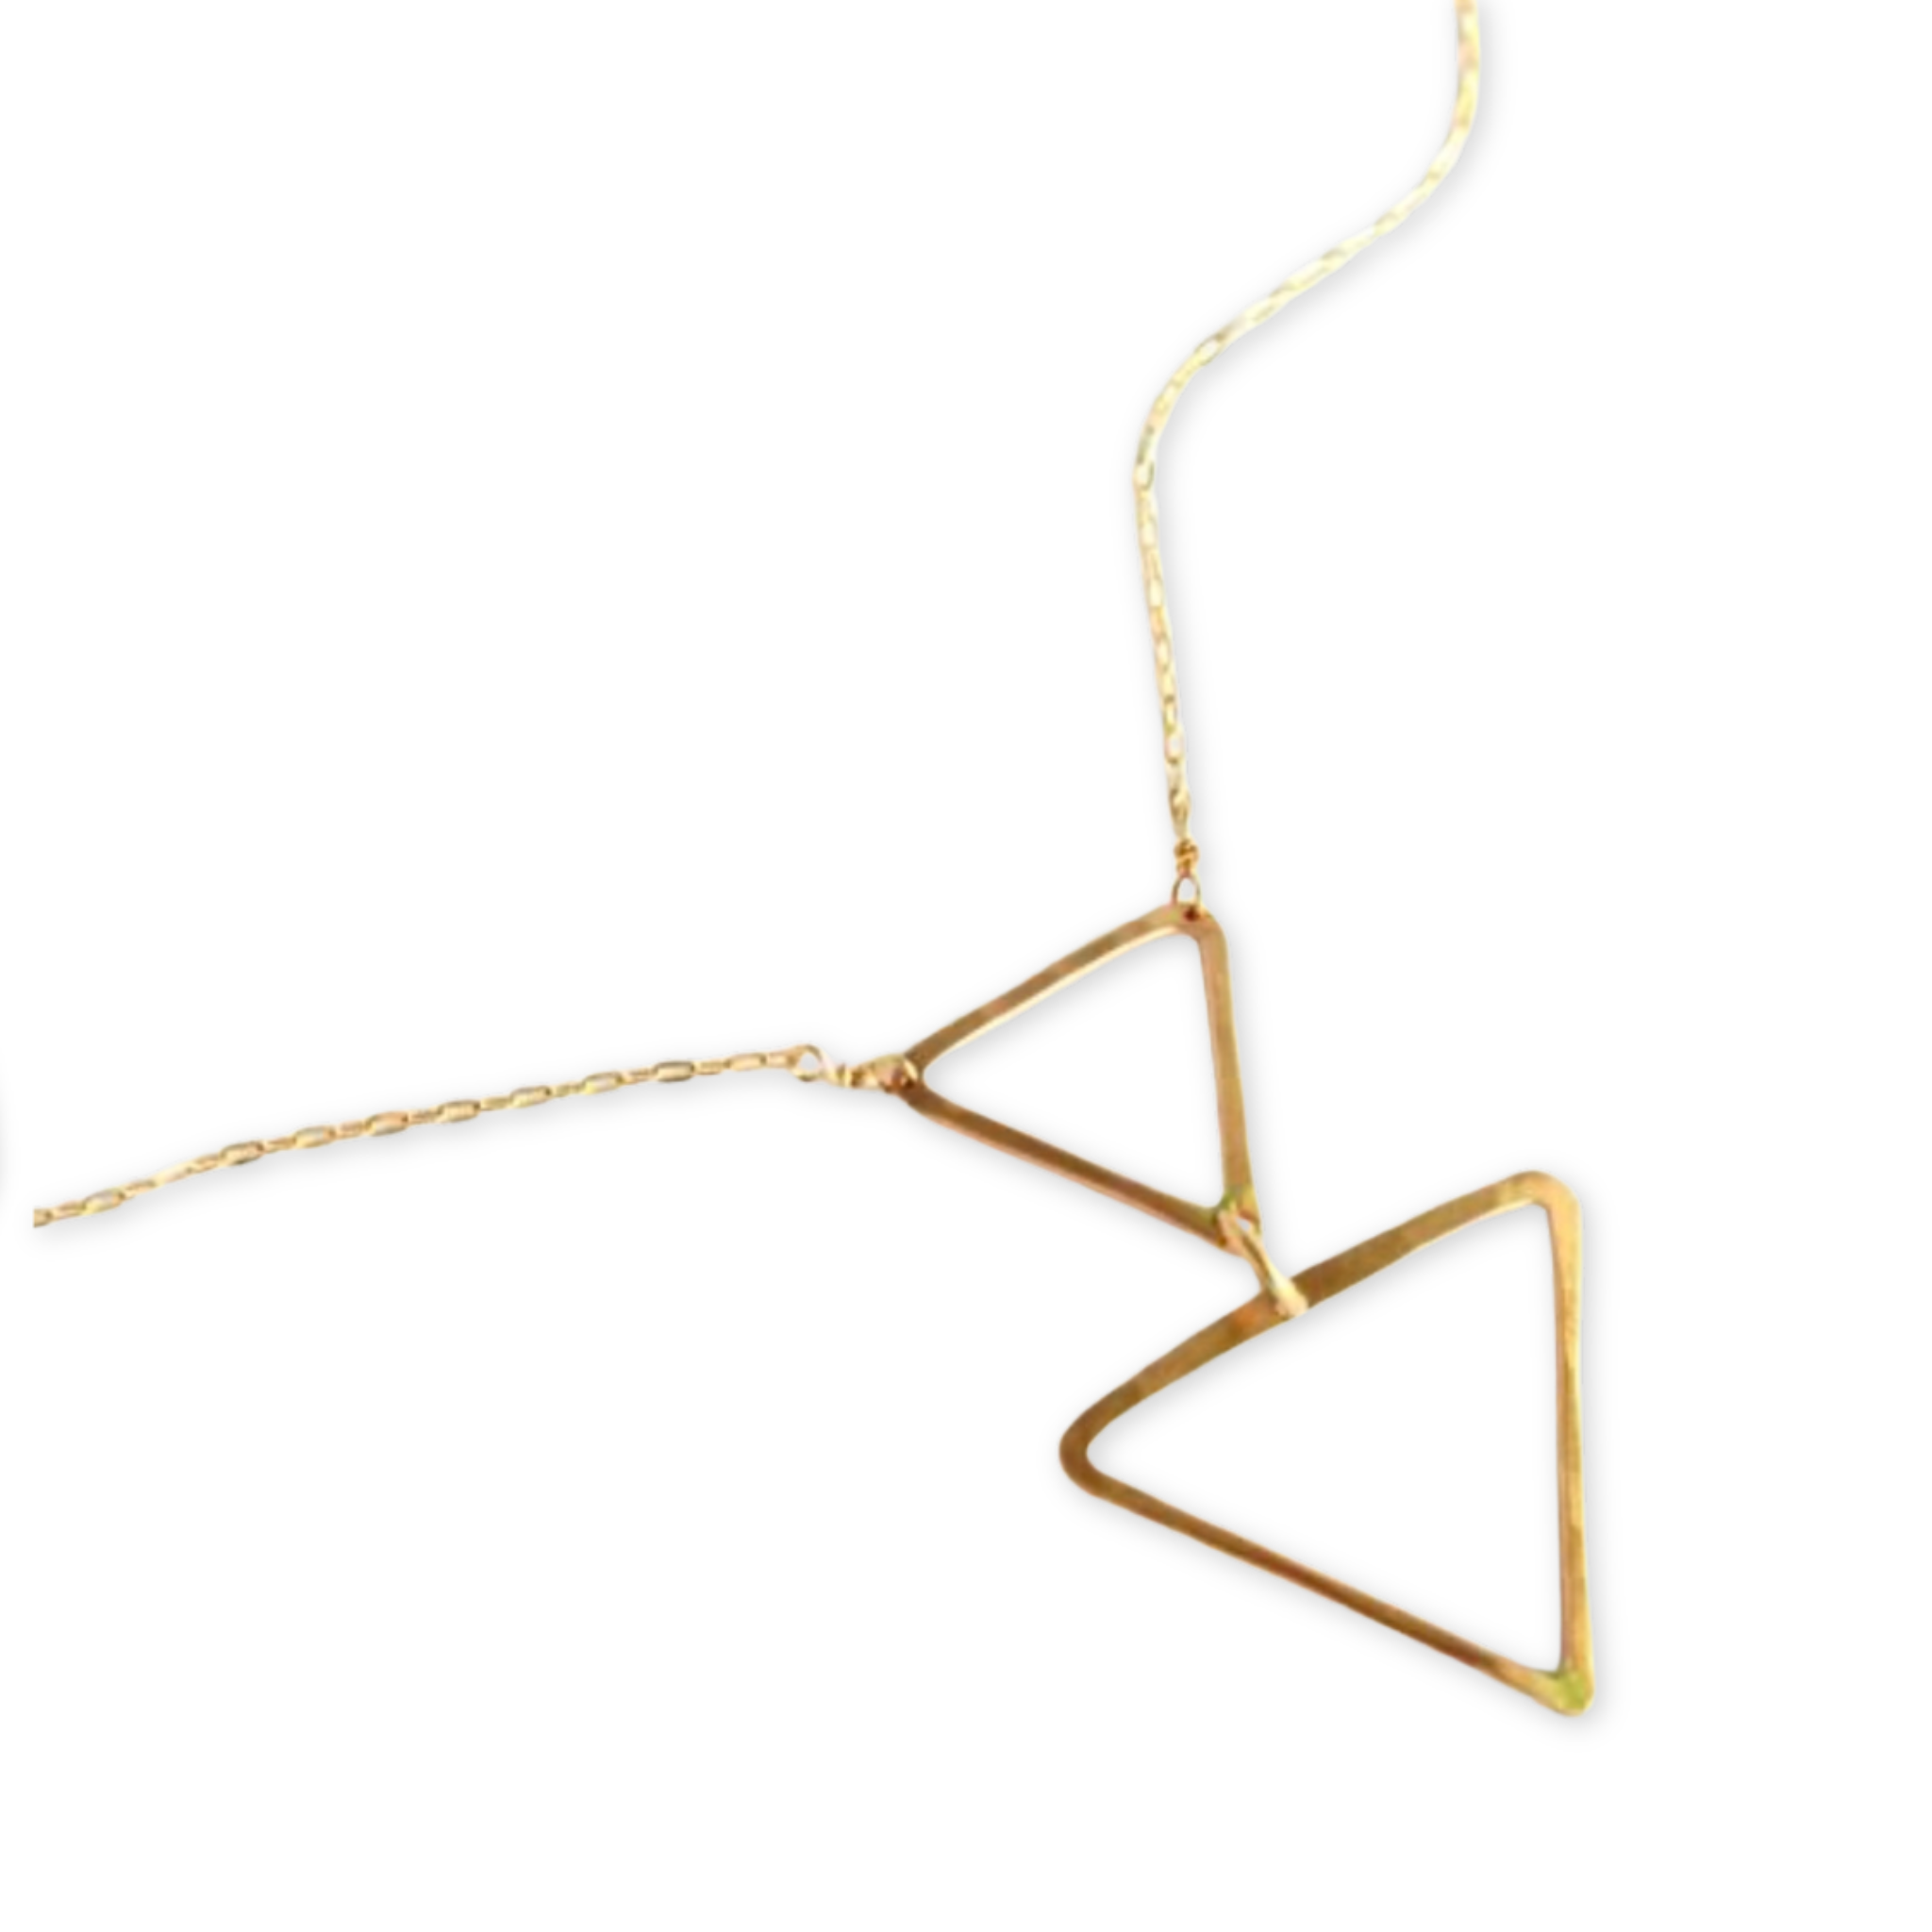 two hammered open triangle pendants hang from a dainty necklace chain